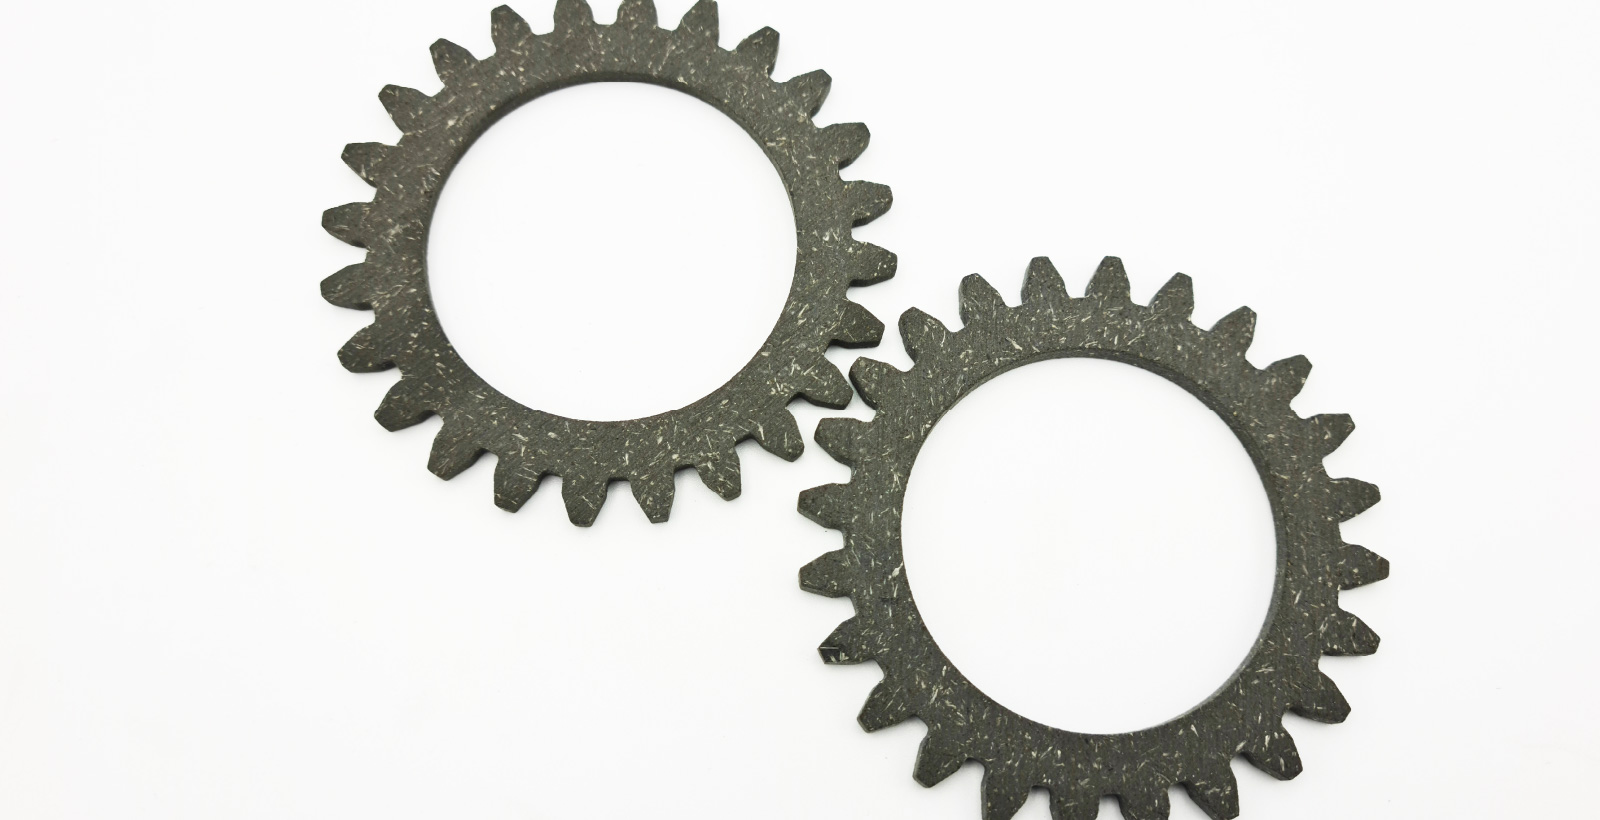 Gear Cut Discs for Paper and Pulp Industry